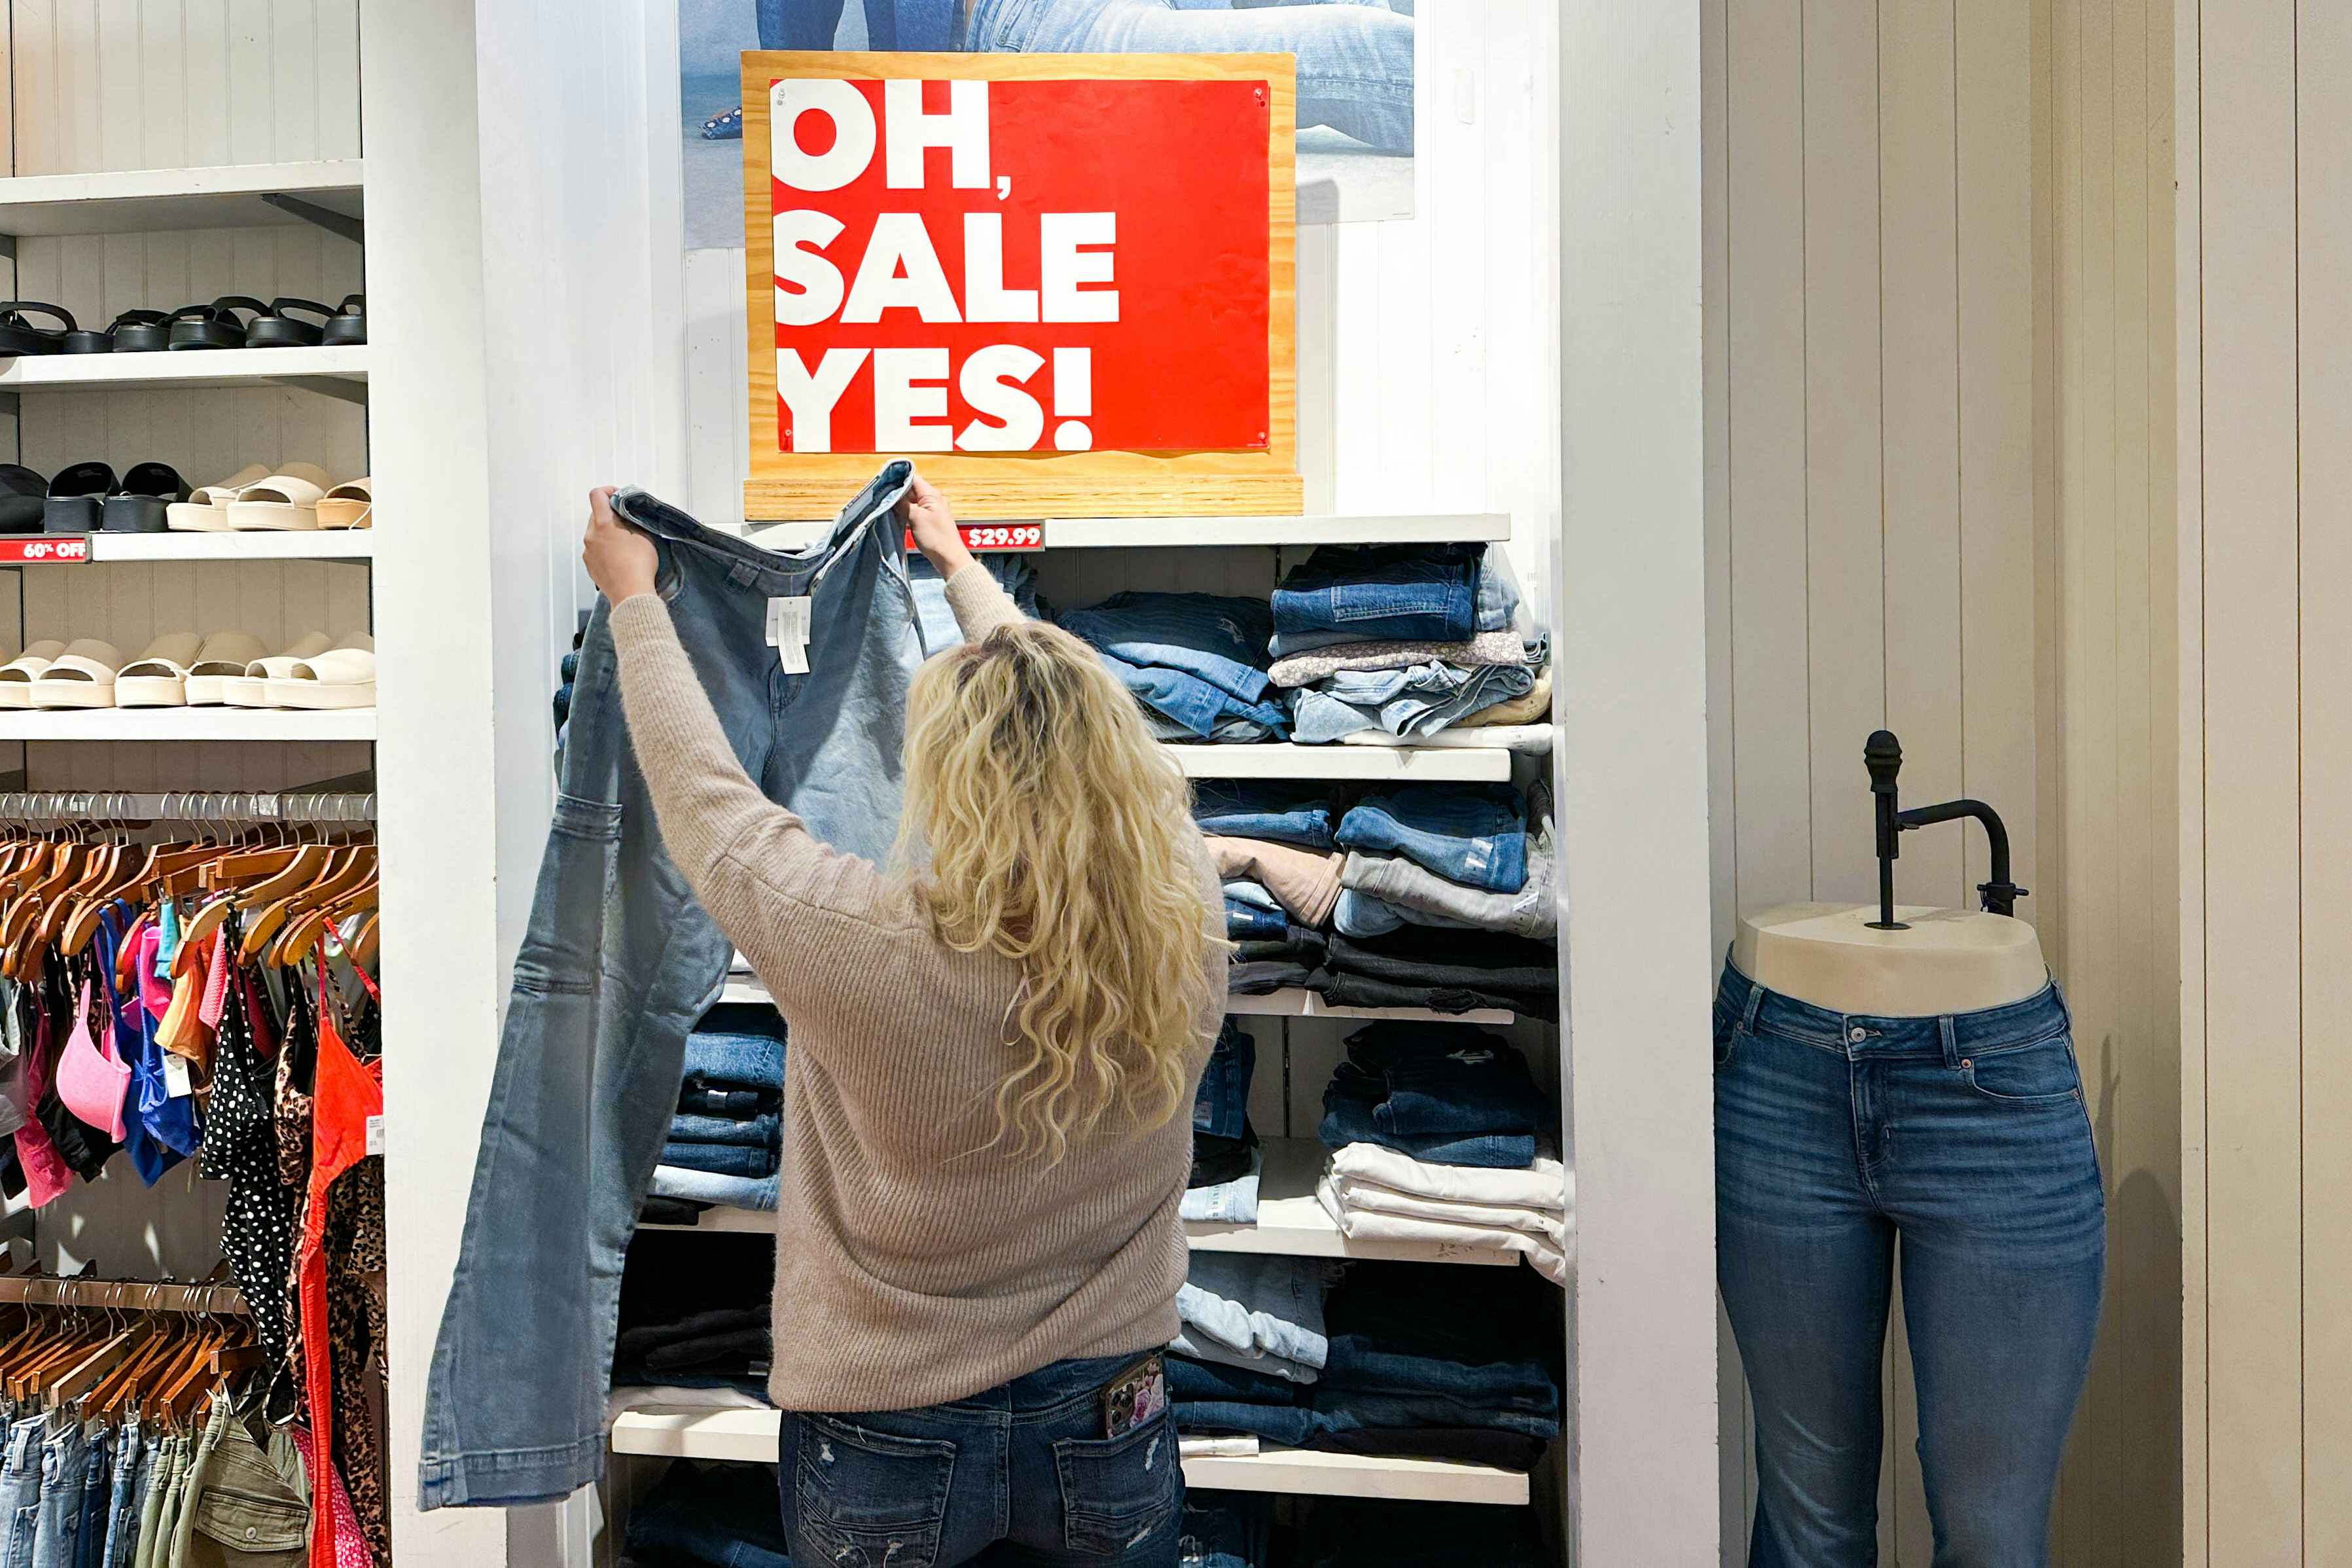 a woman looking at jeans on sale in the amercan eagle store